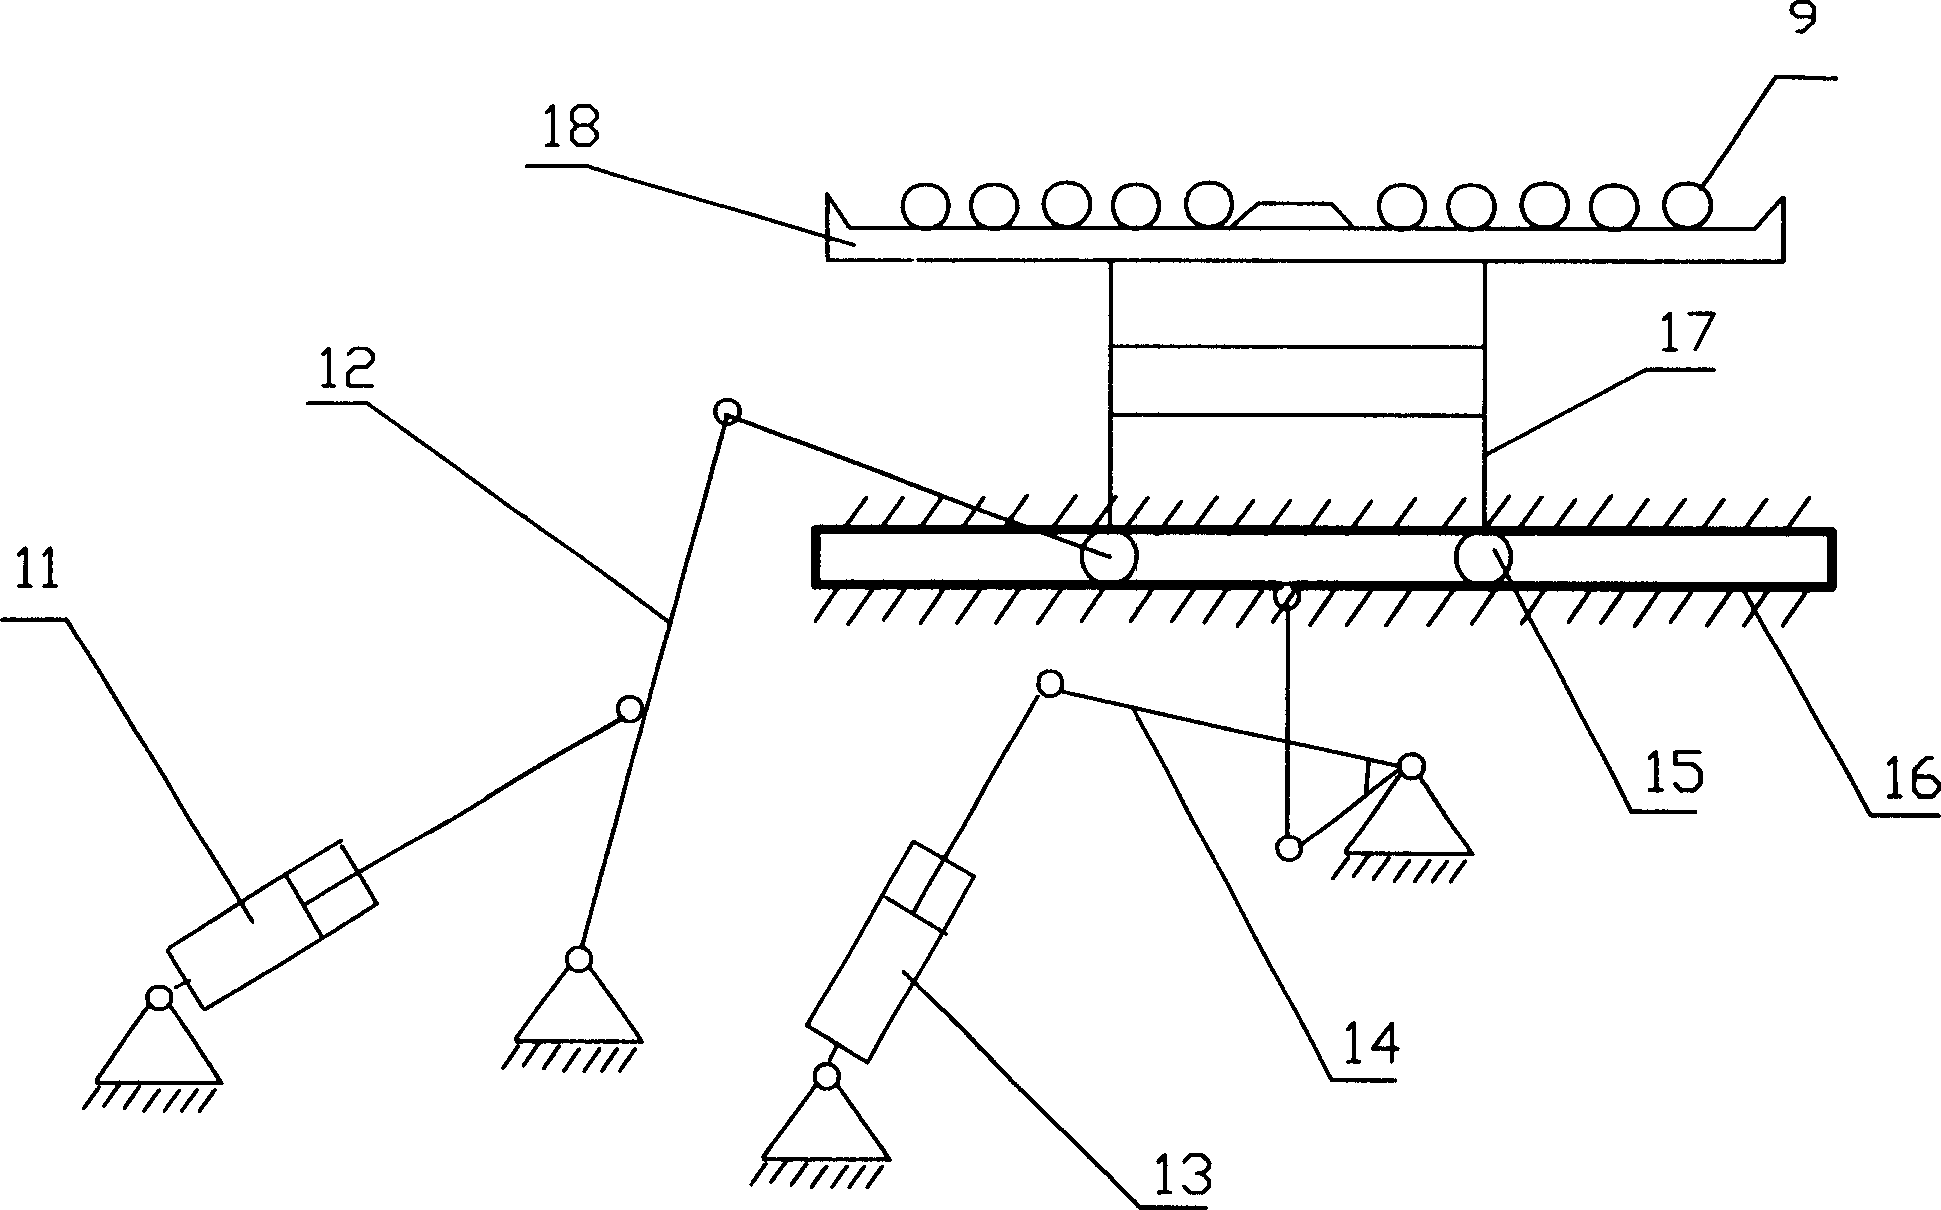 Longitudinal double-row automatic transfer method for fixed length steel in bar production